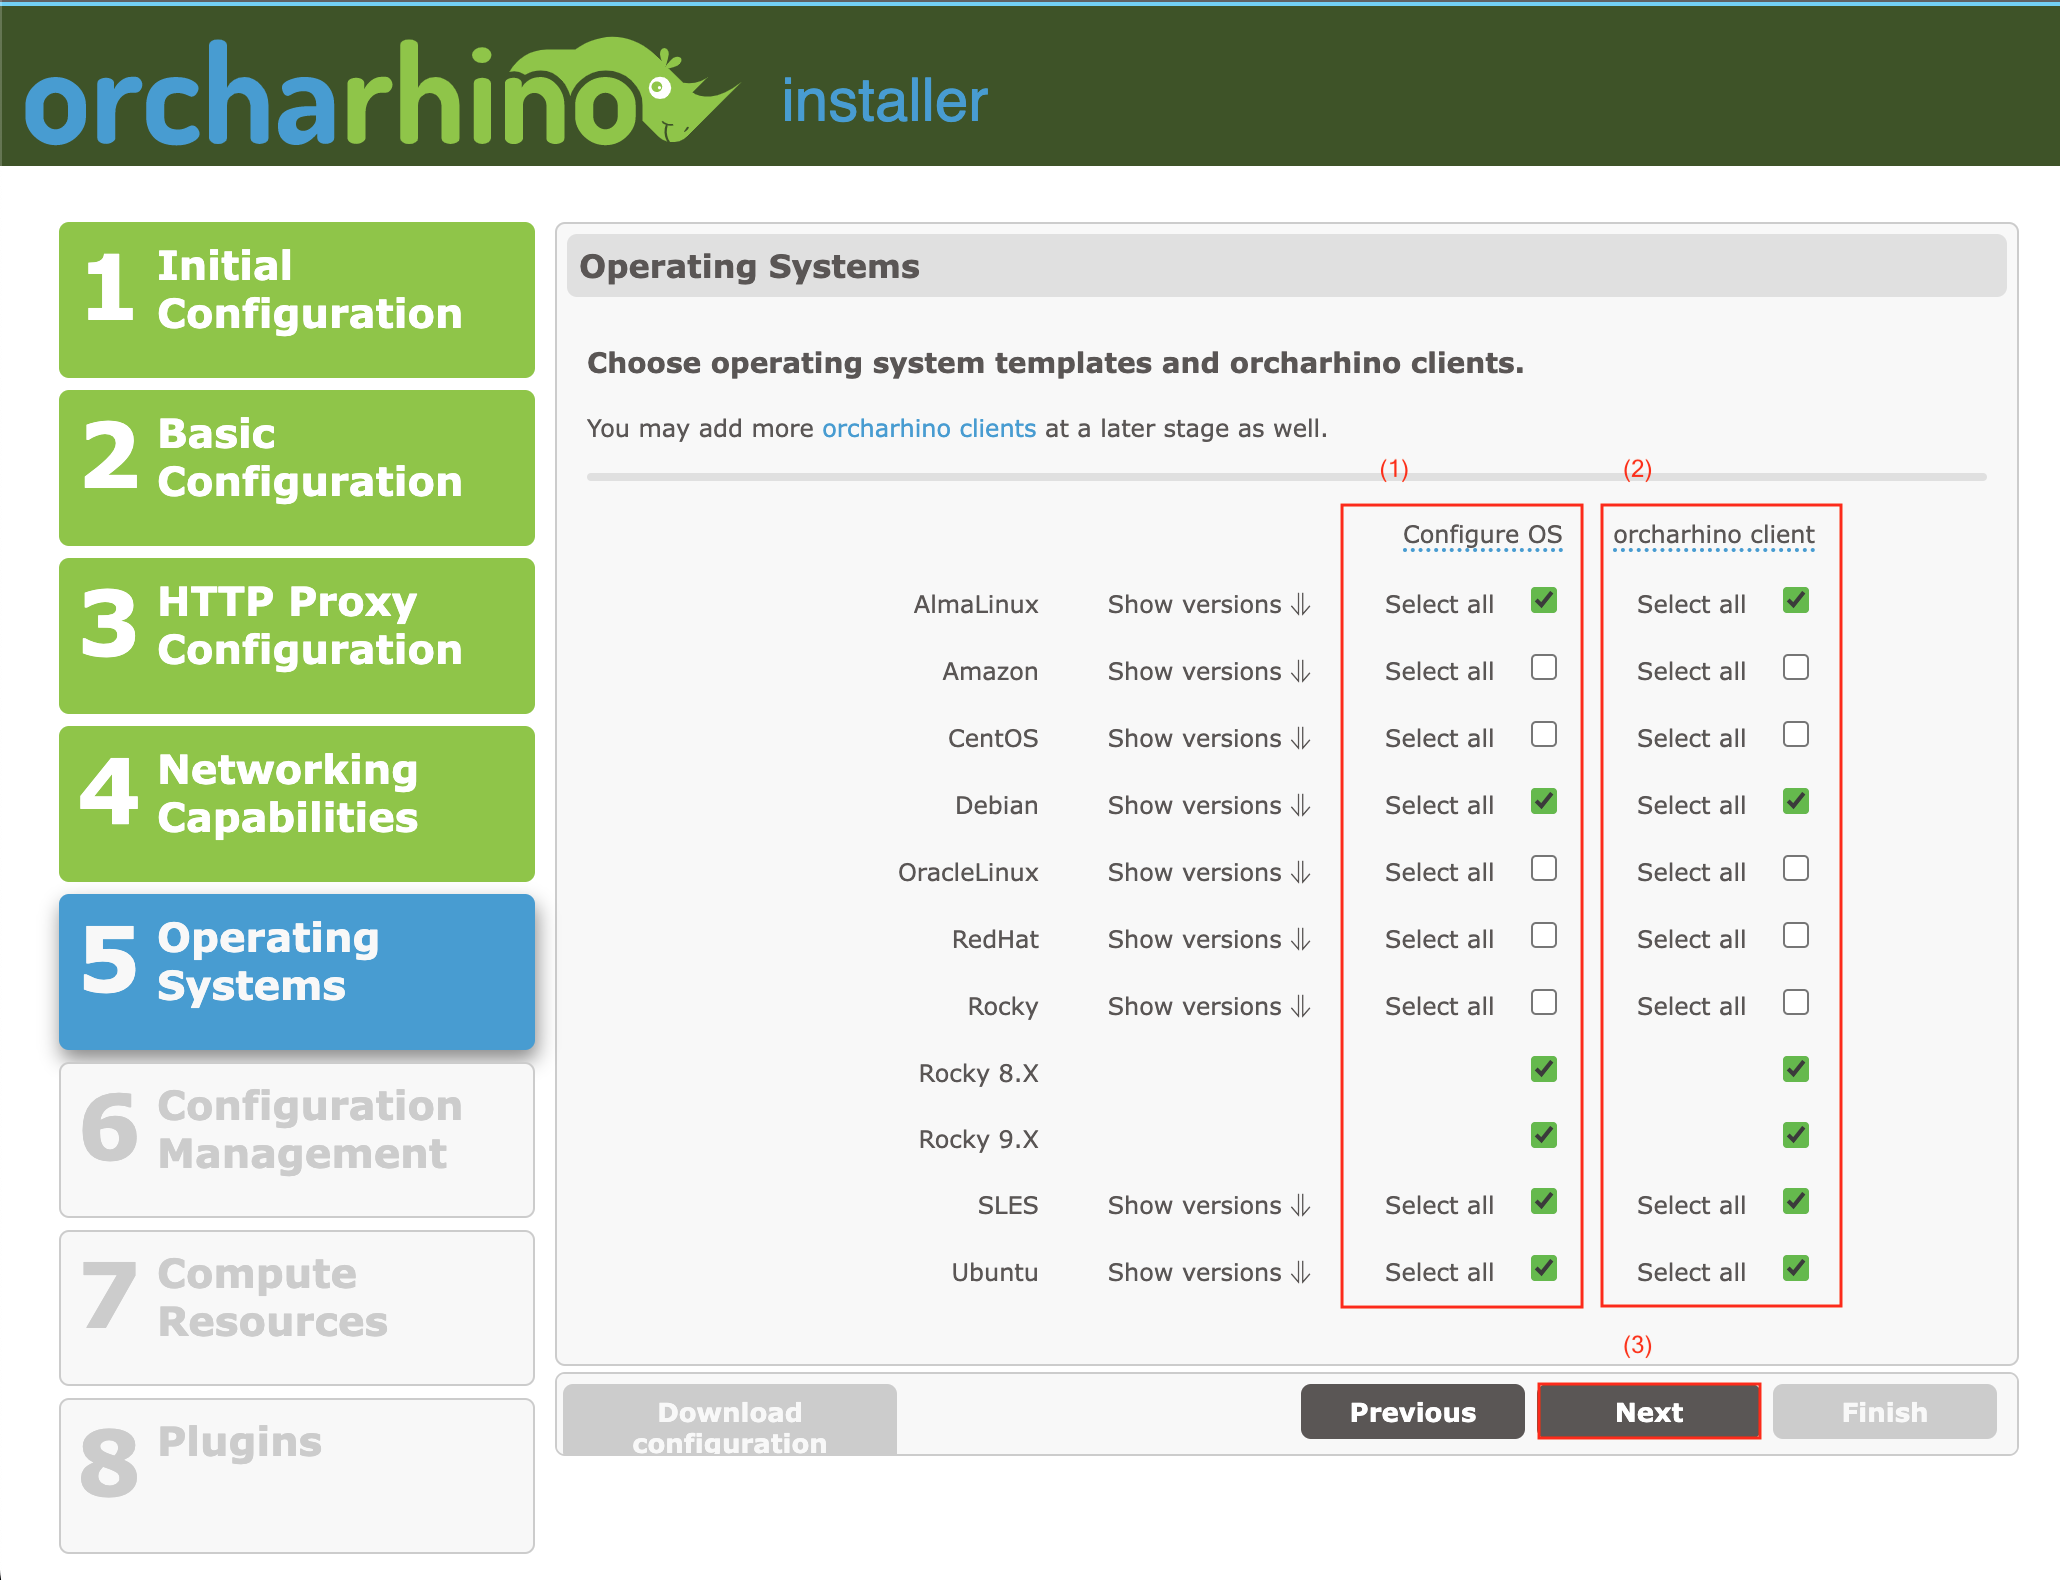 Selecting operating systems in orcharhino Web Installer